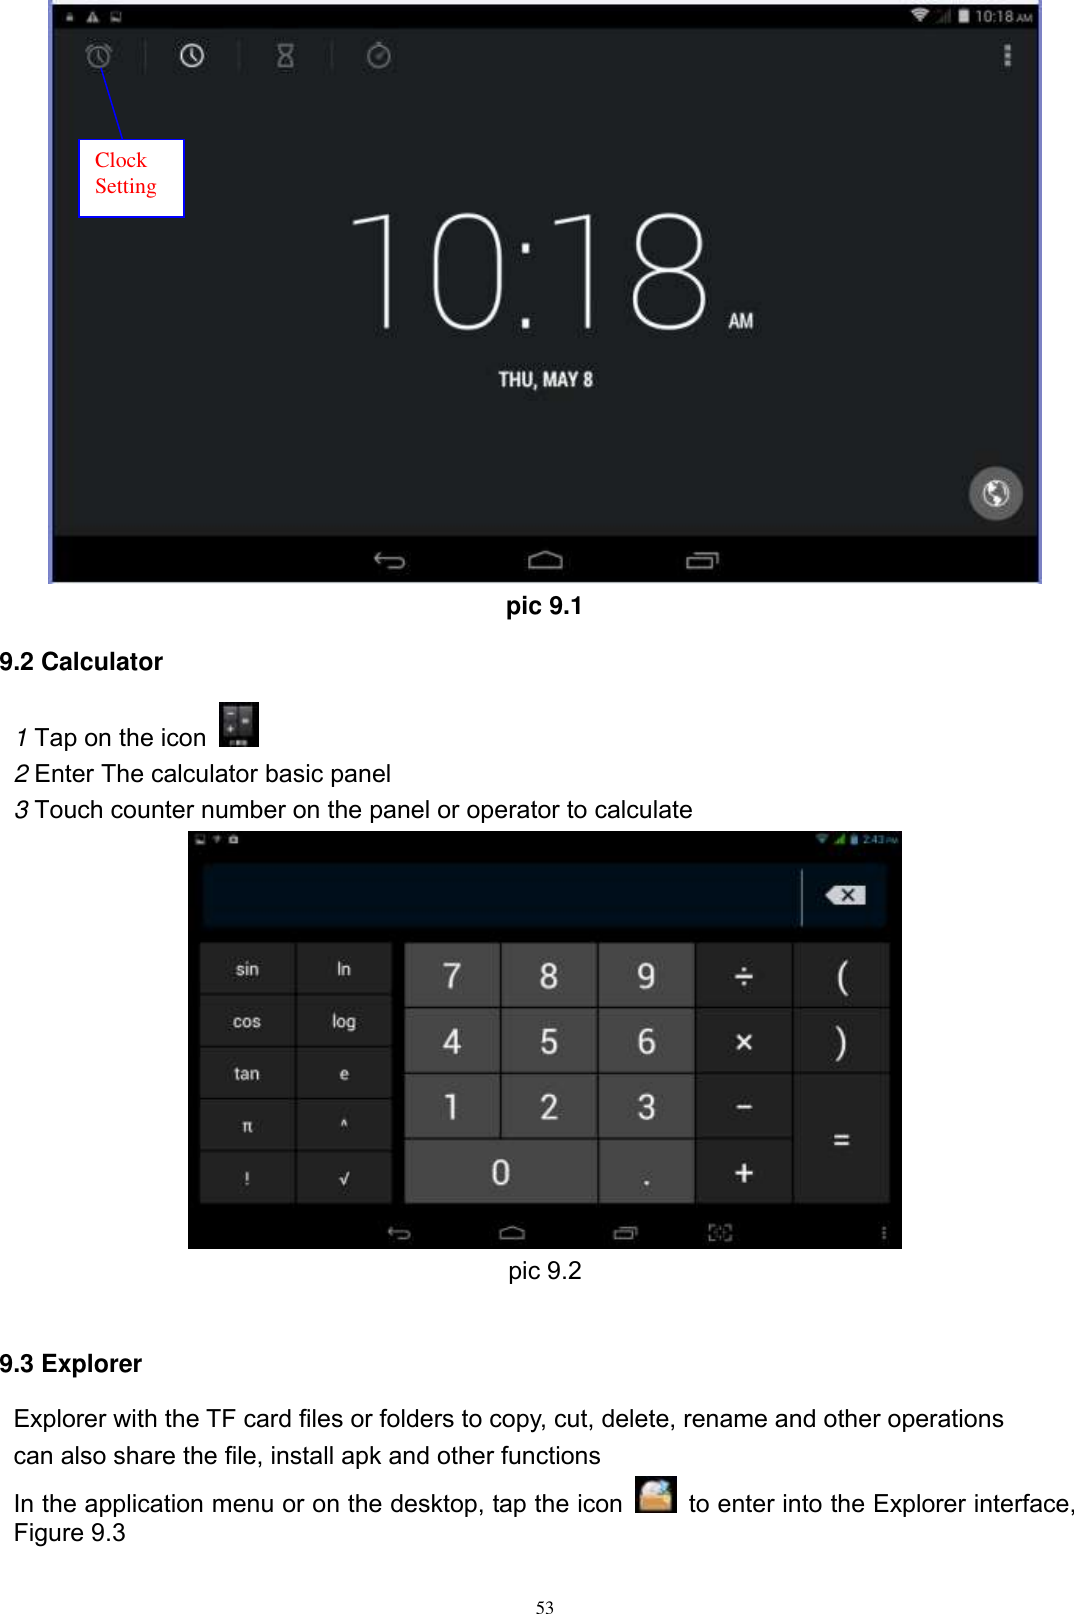      53  pic 9.1 9.2 Calculator 1 Tap on the icon   2 Enter The calculator basic panel   3 Touch counter number on the panel or operator to calculate  pic 9.2  9.3 Explorer Explorer with the TF card files or folders to copy, cut, delete, rename and other operations can also share the file, install apk and other functions In the application menu or on the desktop, tap the icon    to enter into the Explorer interface, Figure 9.3  Clock Setting 